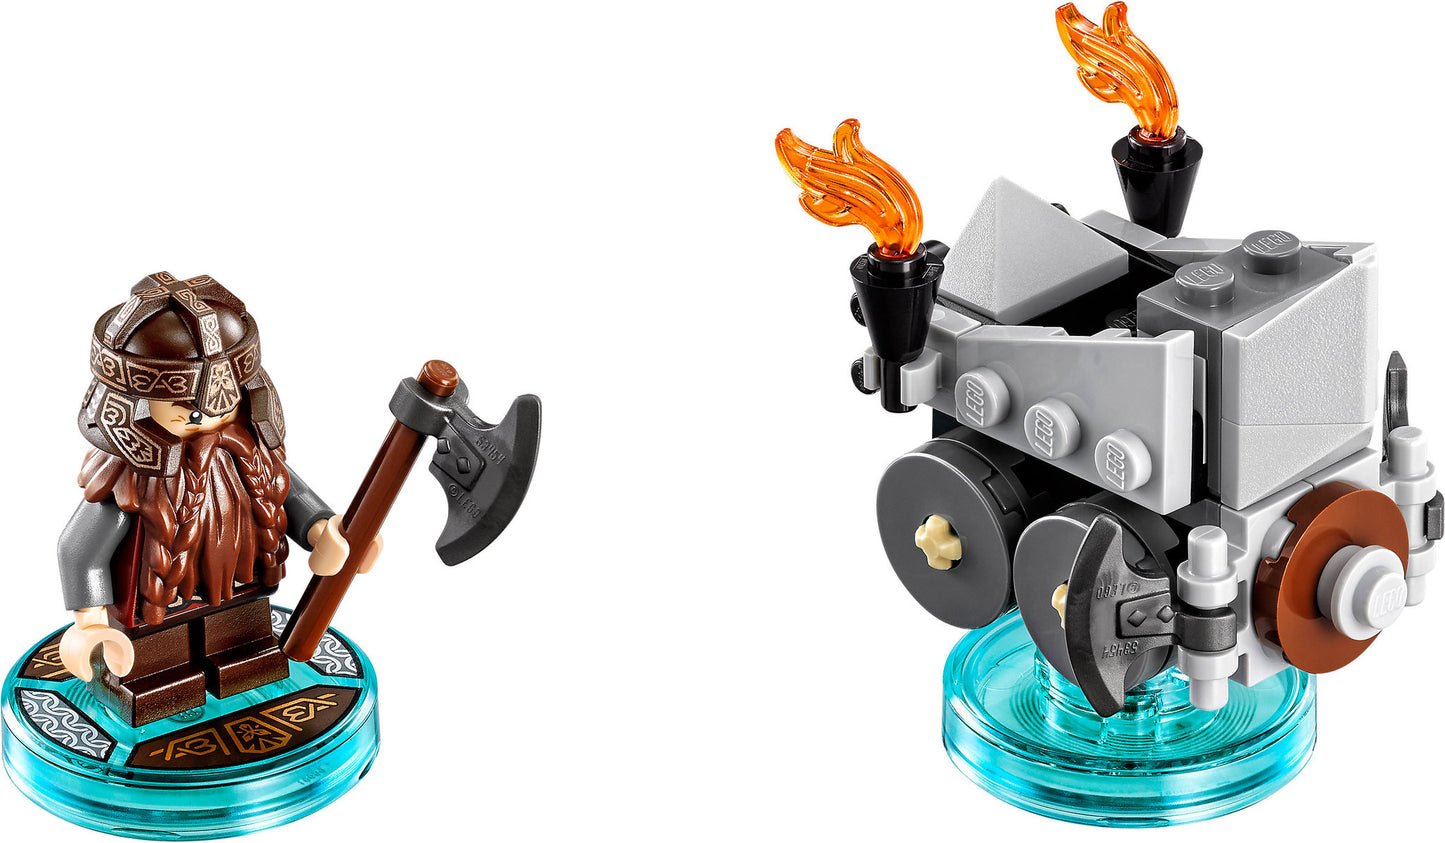 71220 LEGO Dimension - The Lord of the Rings - Fun Pack: Gimli